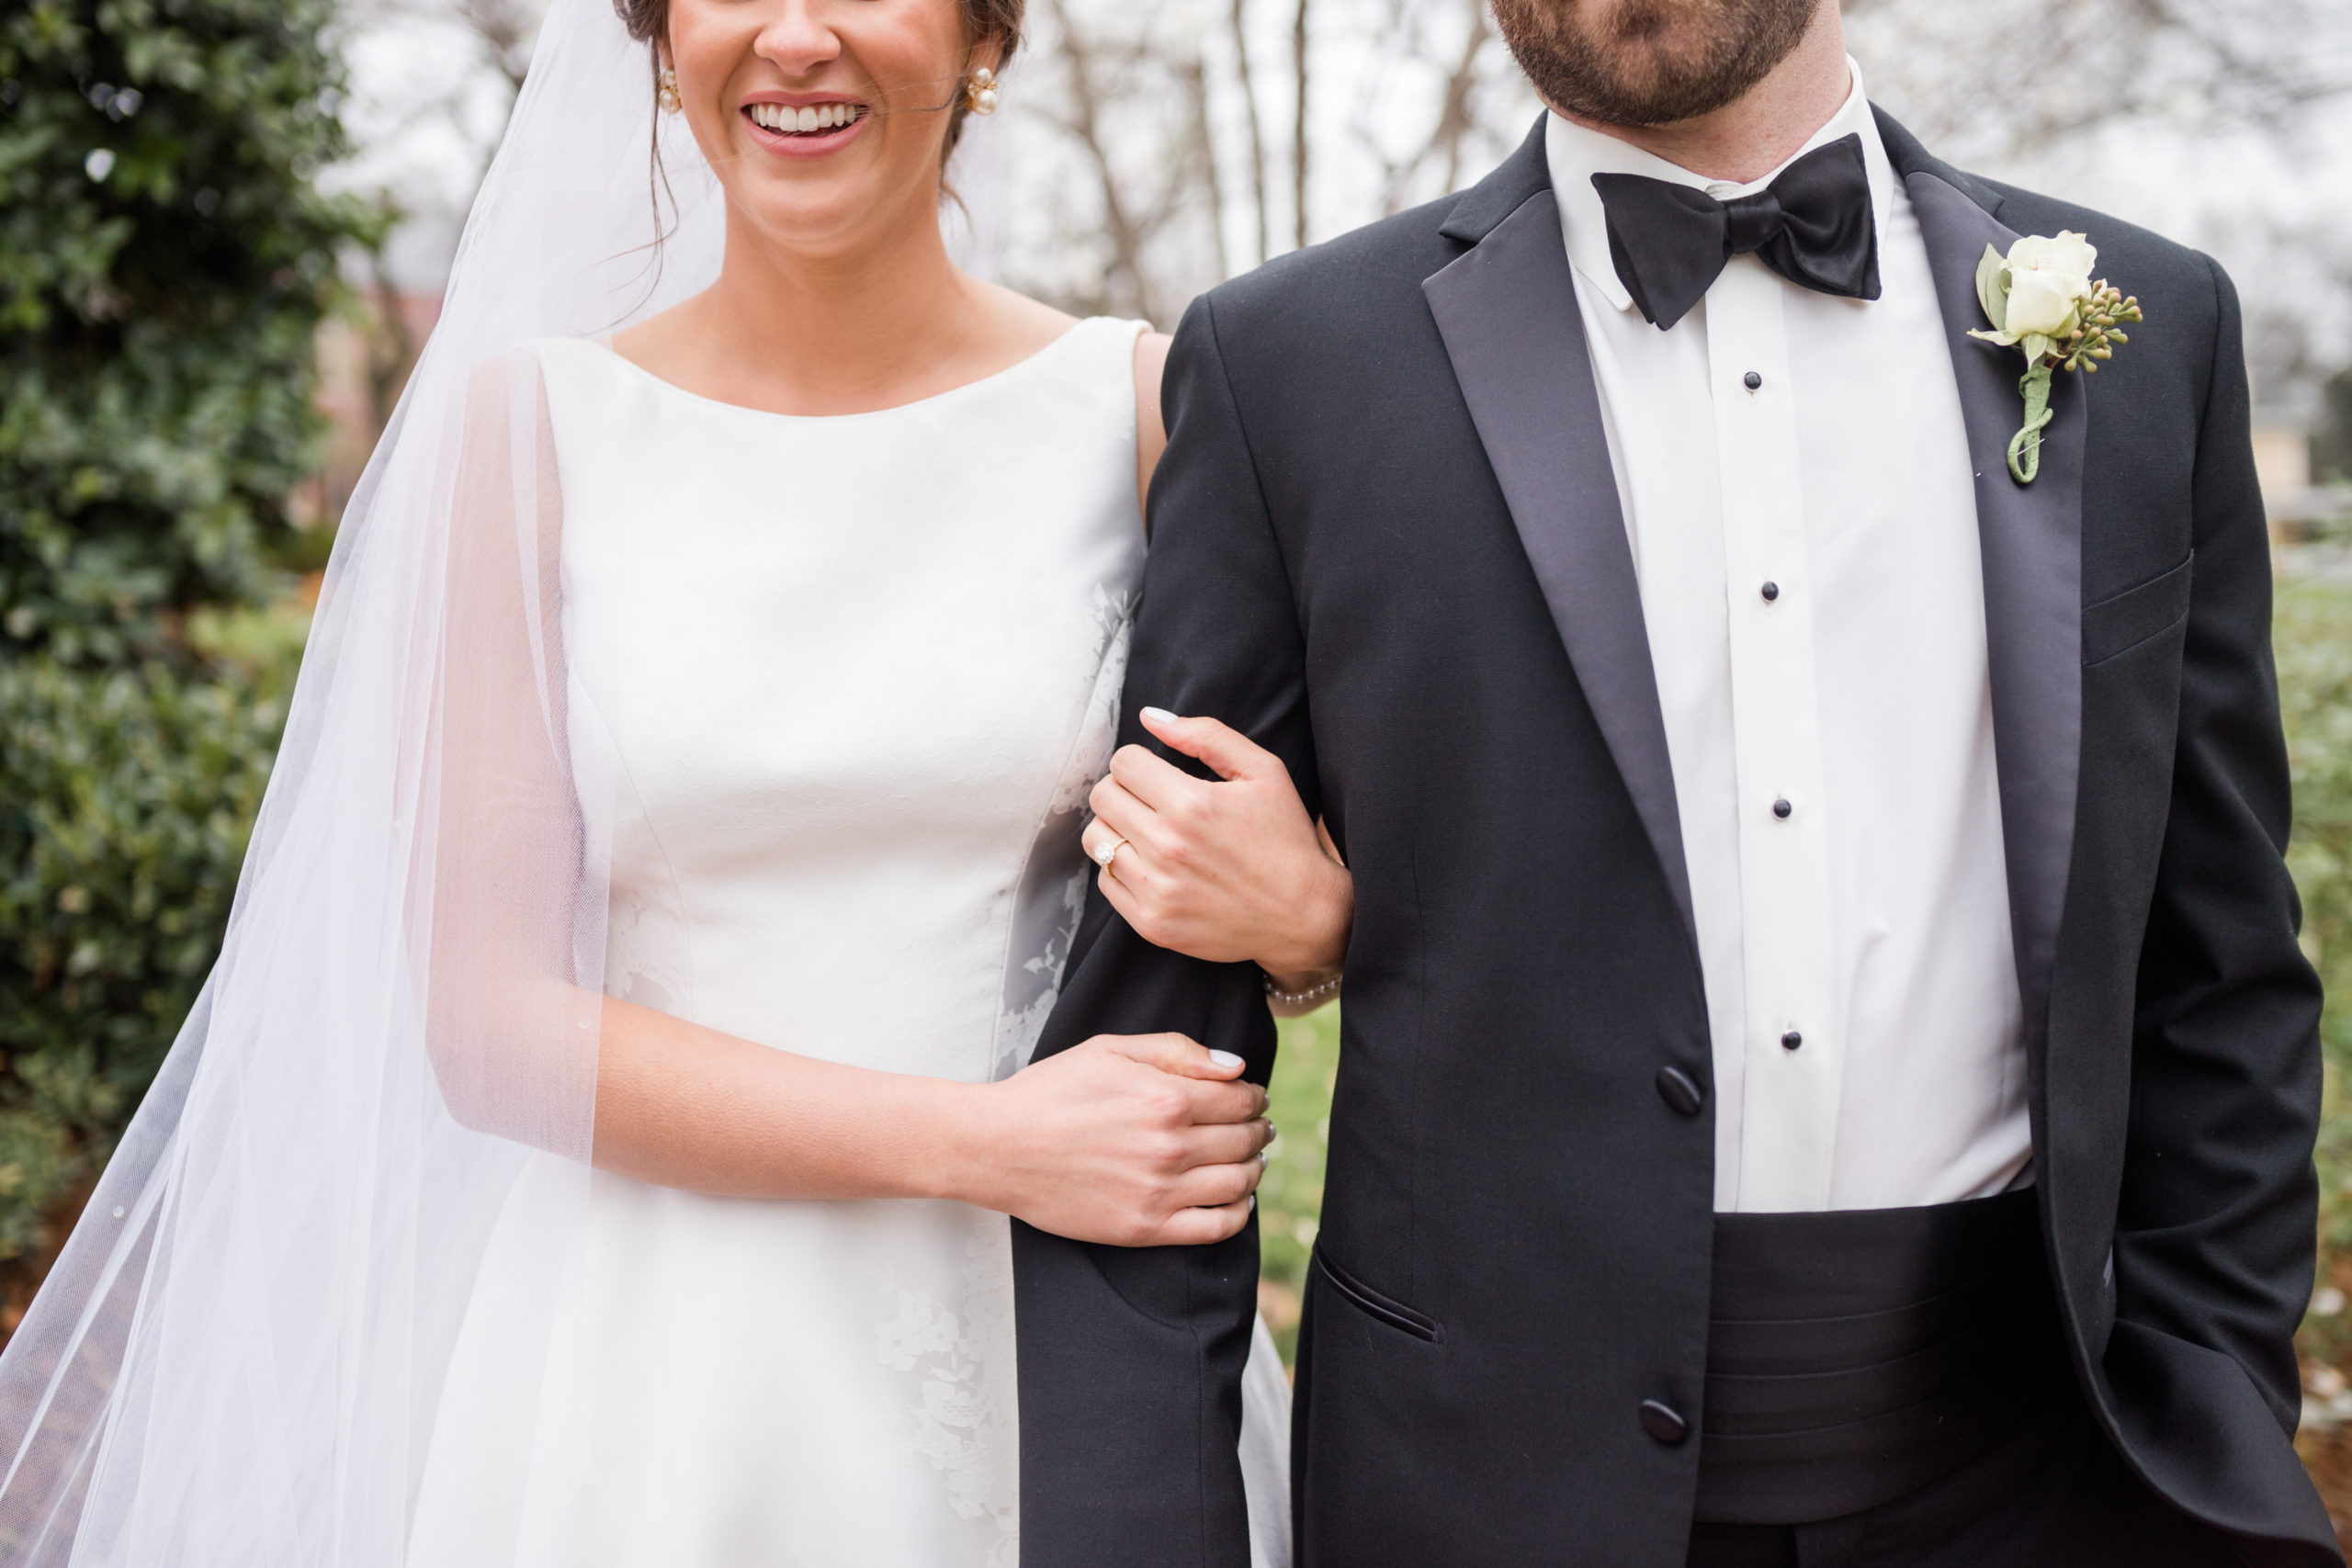 Spring Wedding at Belle Meade Country Club in Nashville, Tennessee by Sweet Williams Photography, a wedding and portrait photographer.